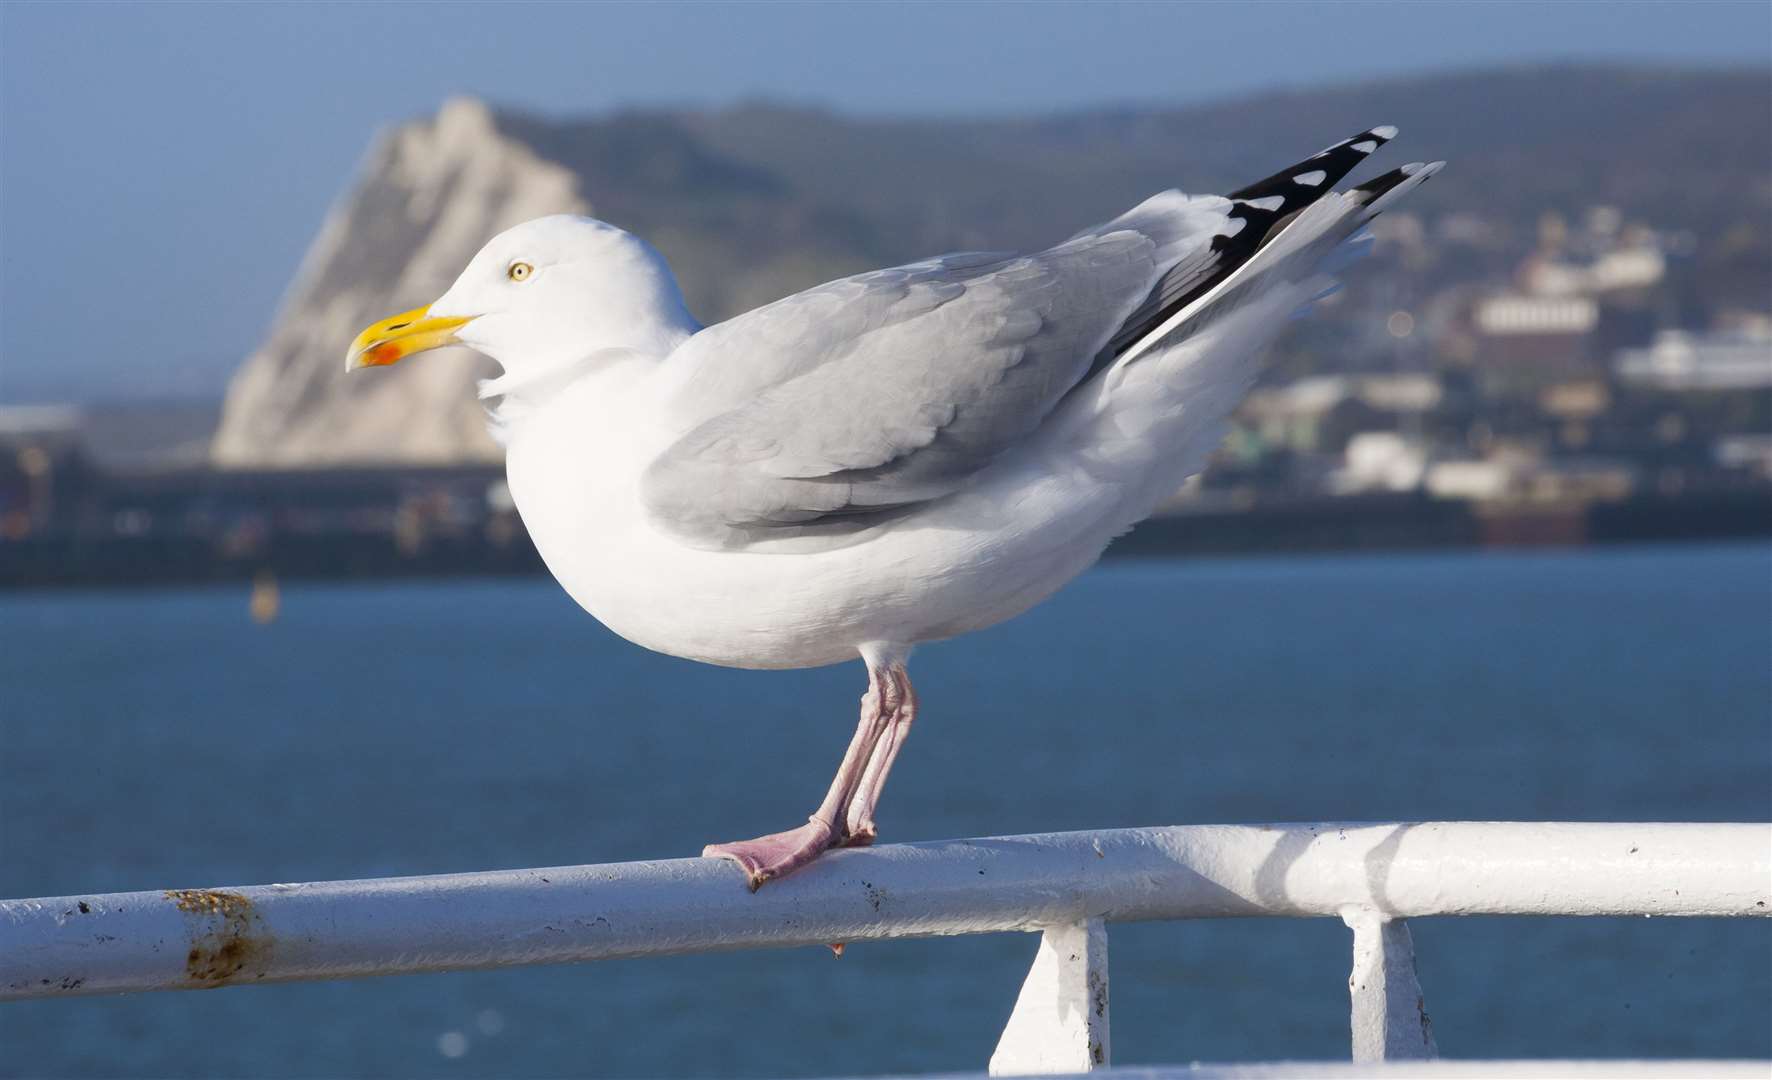 Be on the lookout for a seagull